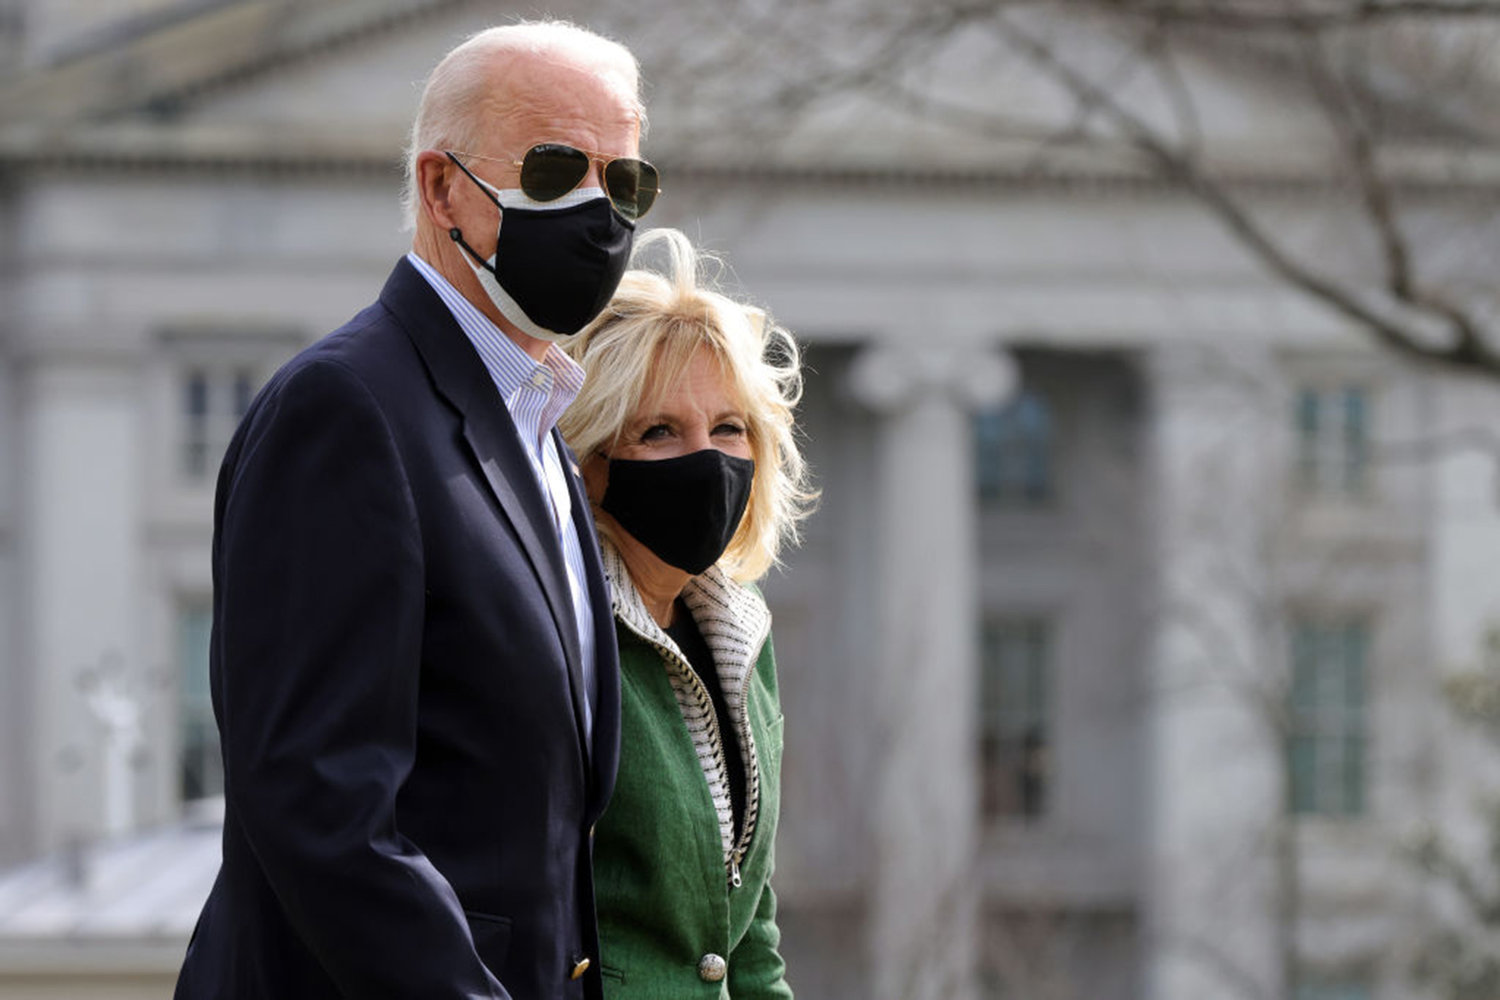 U.S. President Joe Biden and first lady Jill Biden walk towards the Marine One on the South Lawn before a departure from the White House Feb. 26, 2021 in Washington, D.C. The Bidens showed an annual combined income of $610,702 in 2021. (Photo by Alex Wong/Getty Images/TNS)